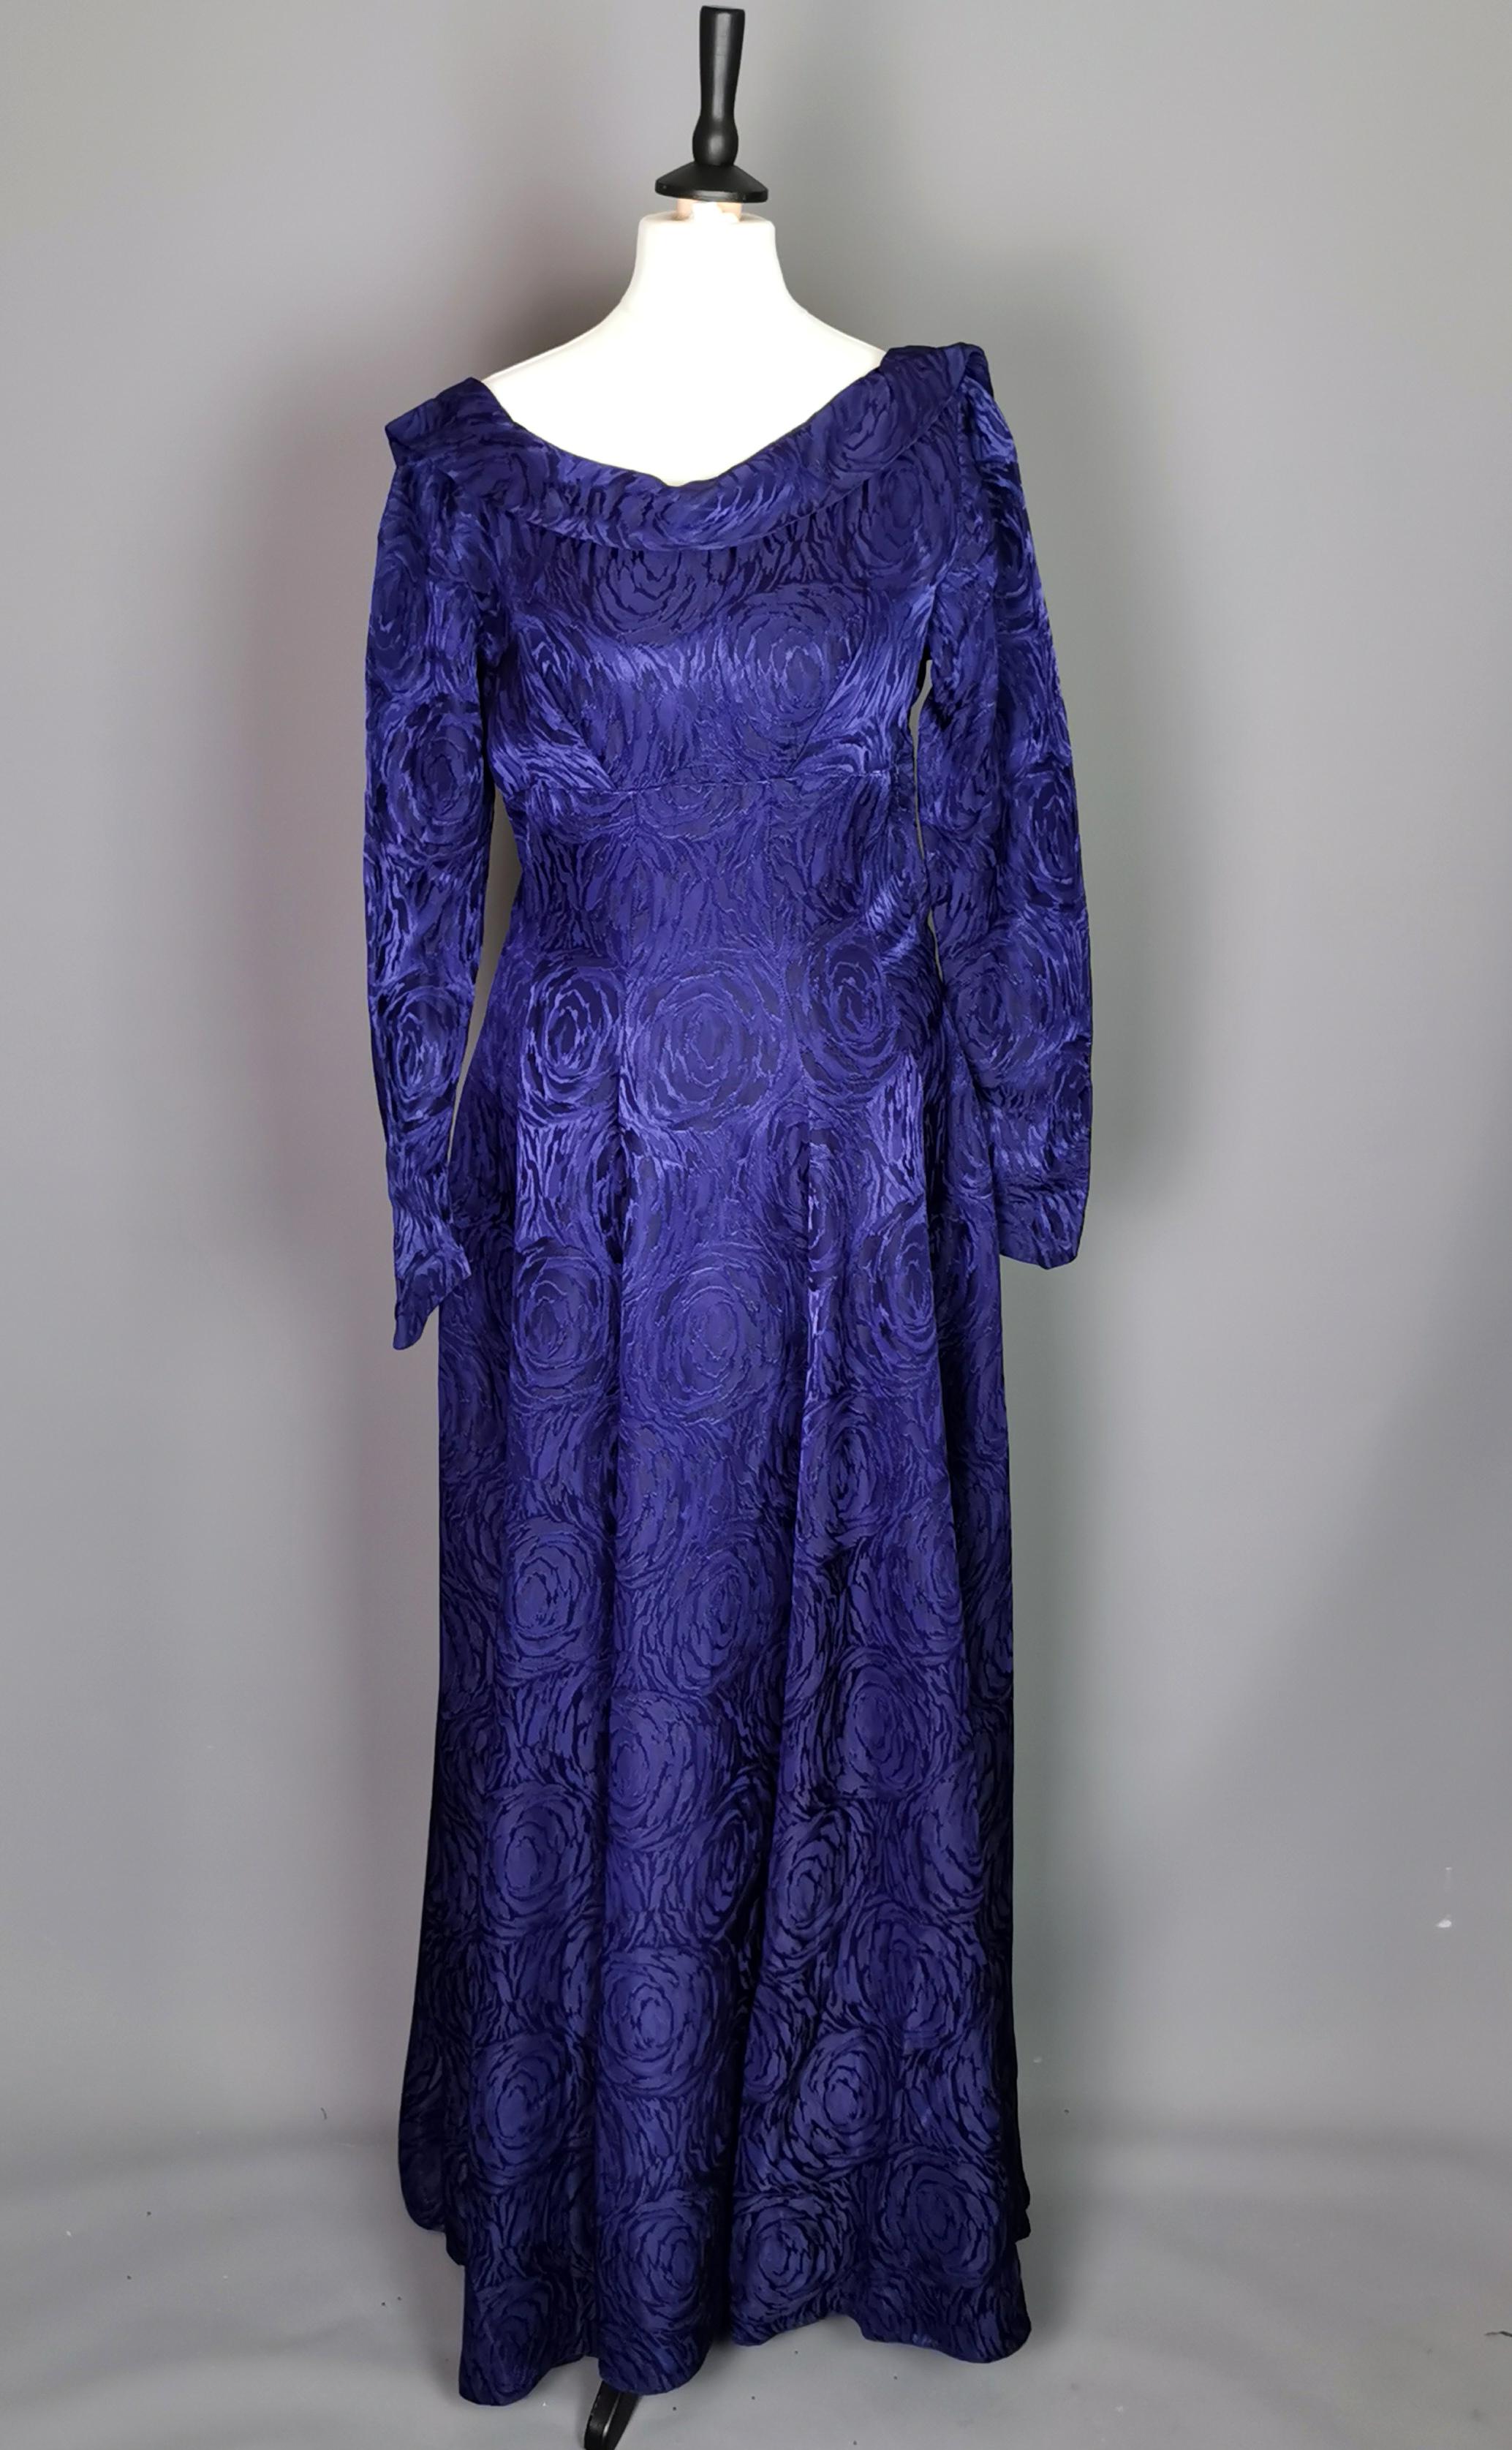 A simply stunning vintage late 1940s evening dress.

Made from a very heavy, purple satin Brocade fabric with a swirling floral pattern.

It has long tulip sleeves that fasten at the wrist with press stud fasteners, the neckline is scooped with a